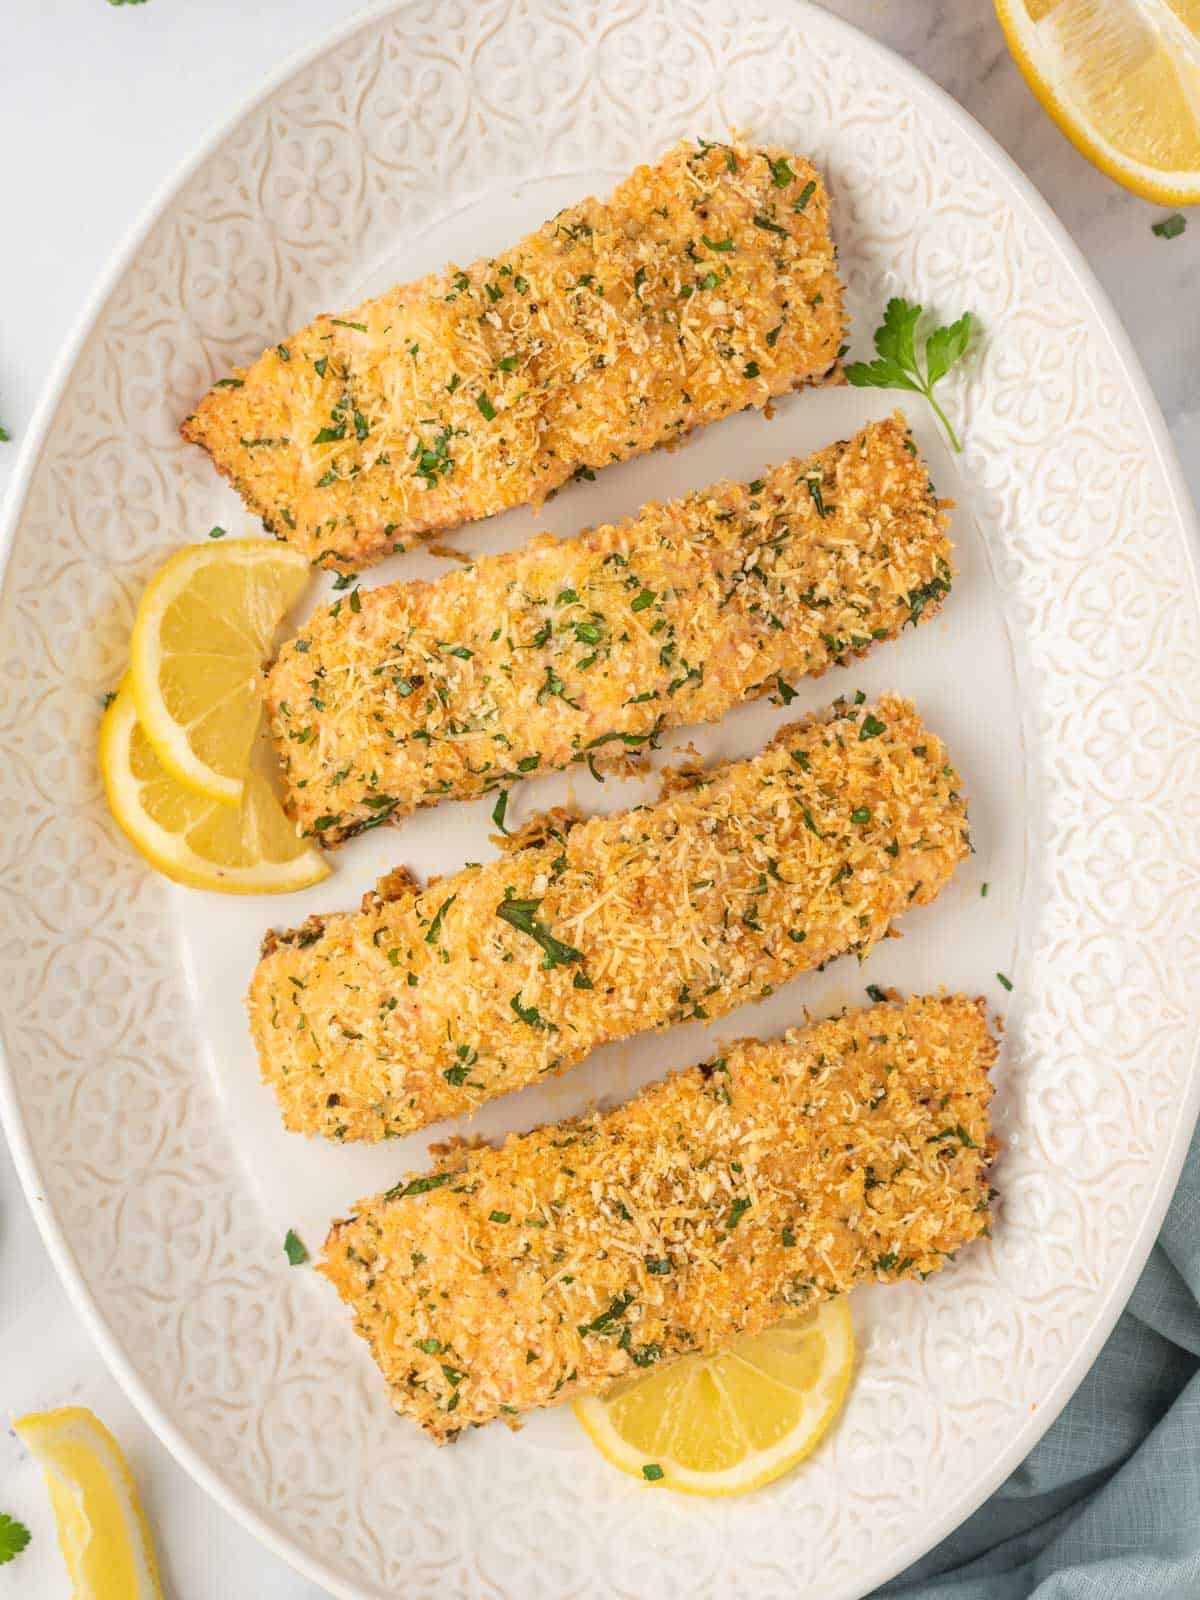 Parmesan crusted salmon recipe on a platter.